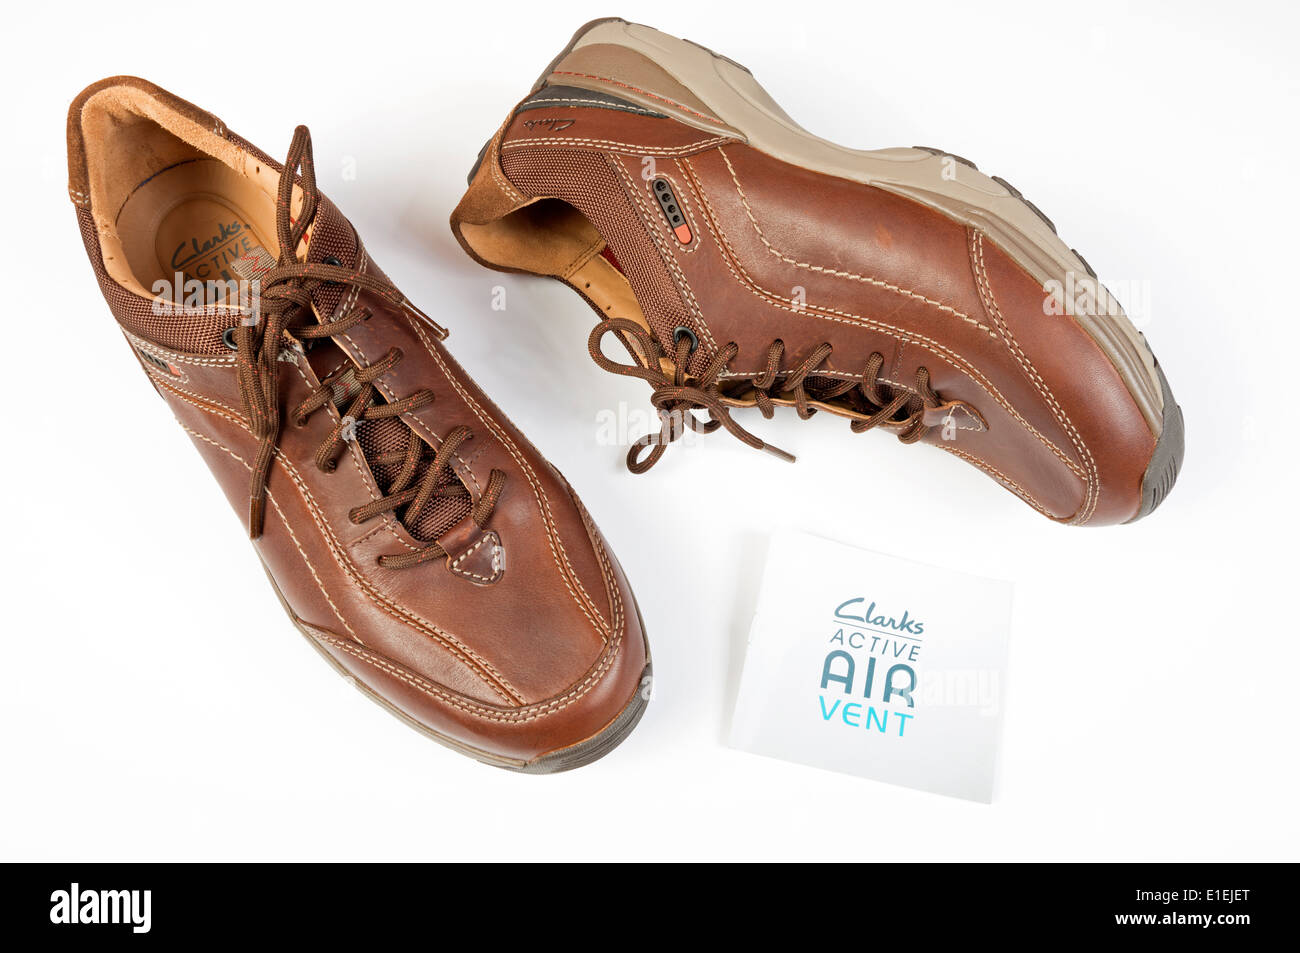 Wind Manifestatie expeditie Clarks mens active air vent shoes Stock Photo - Alamy